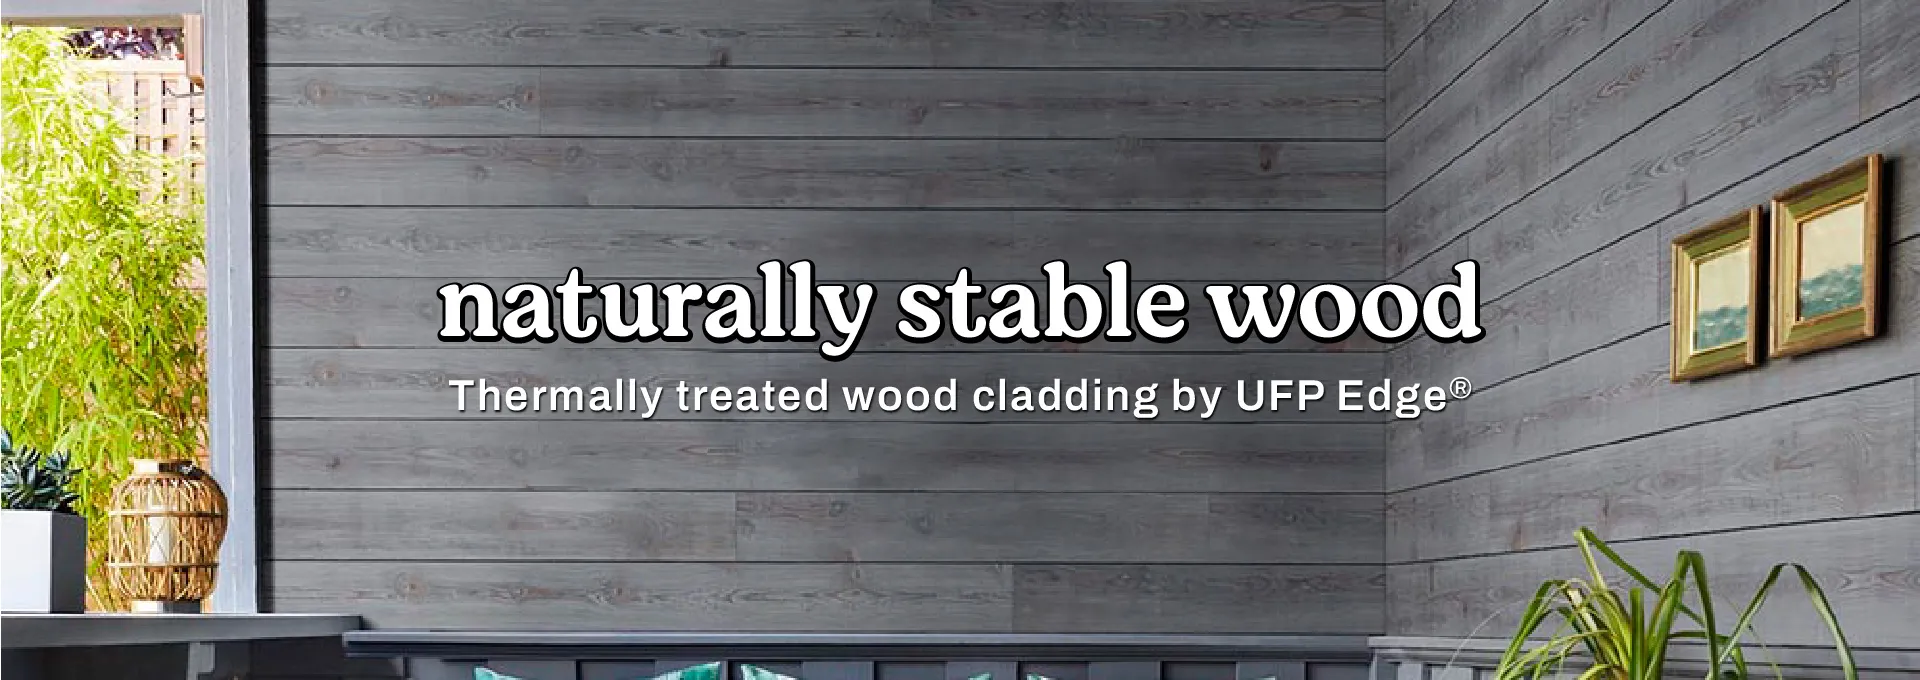 UFP-Edge: Naturally stable wood siding, in stock now!